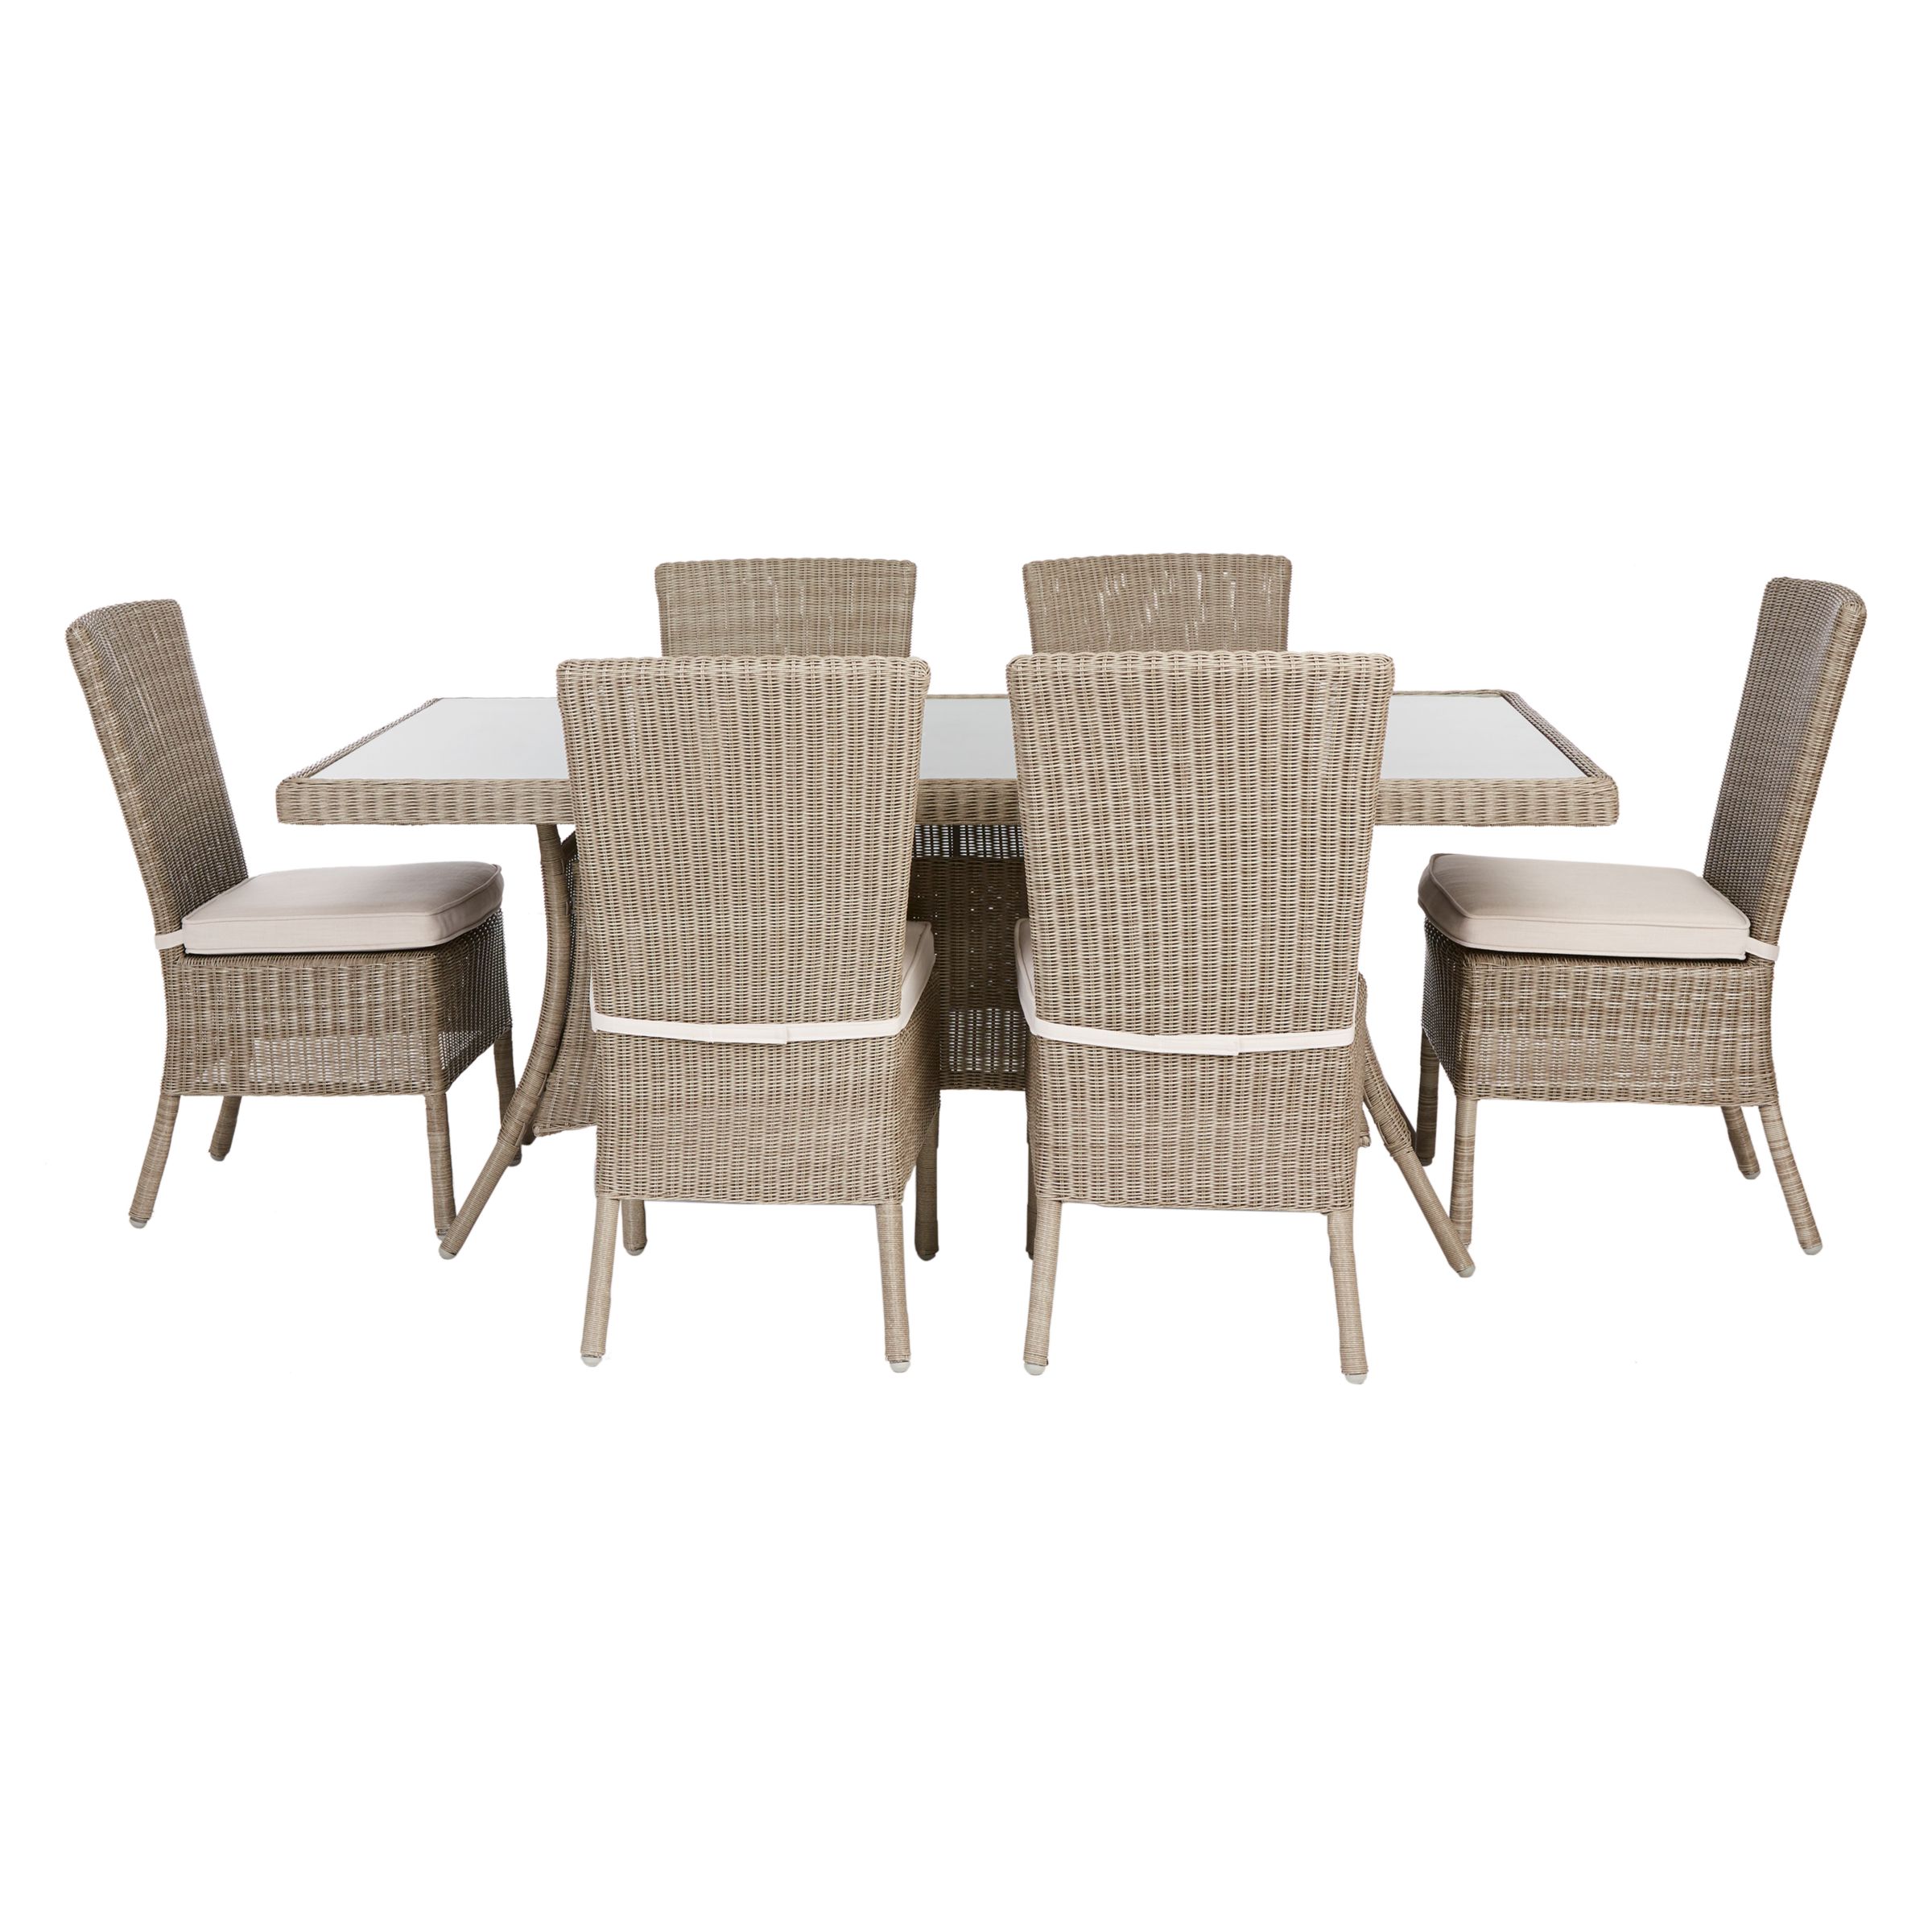 John Lewis Eve Outdoor Dining Table & Chairs Set